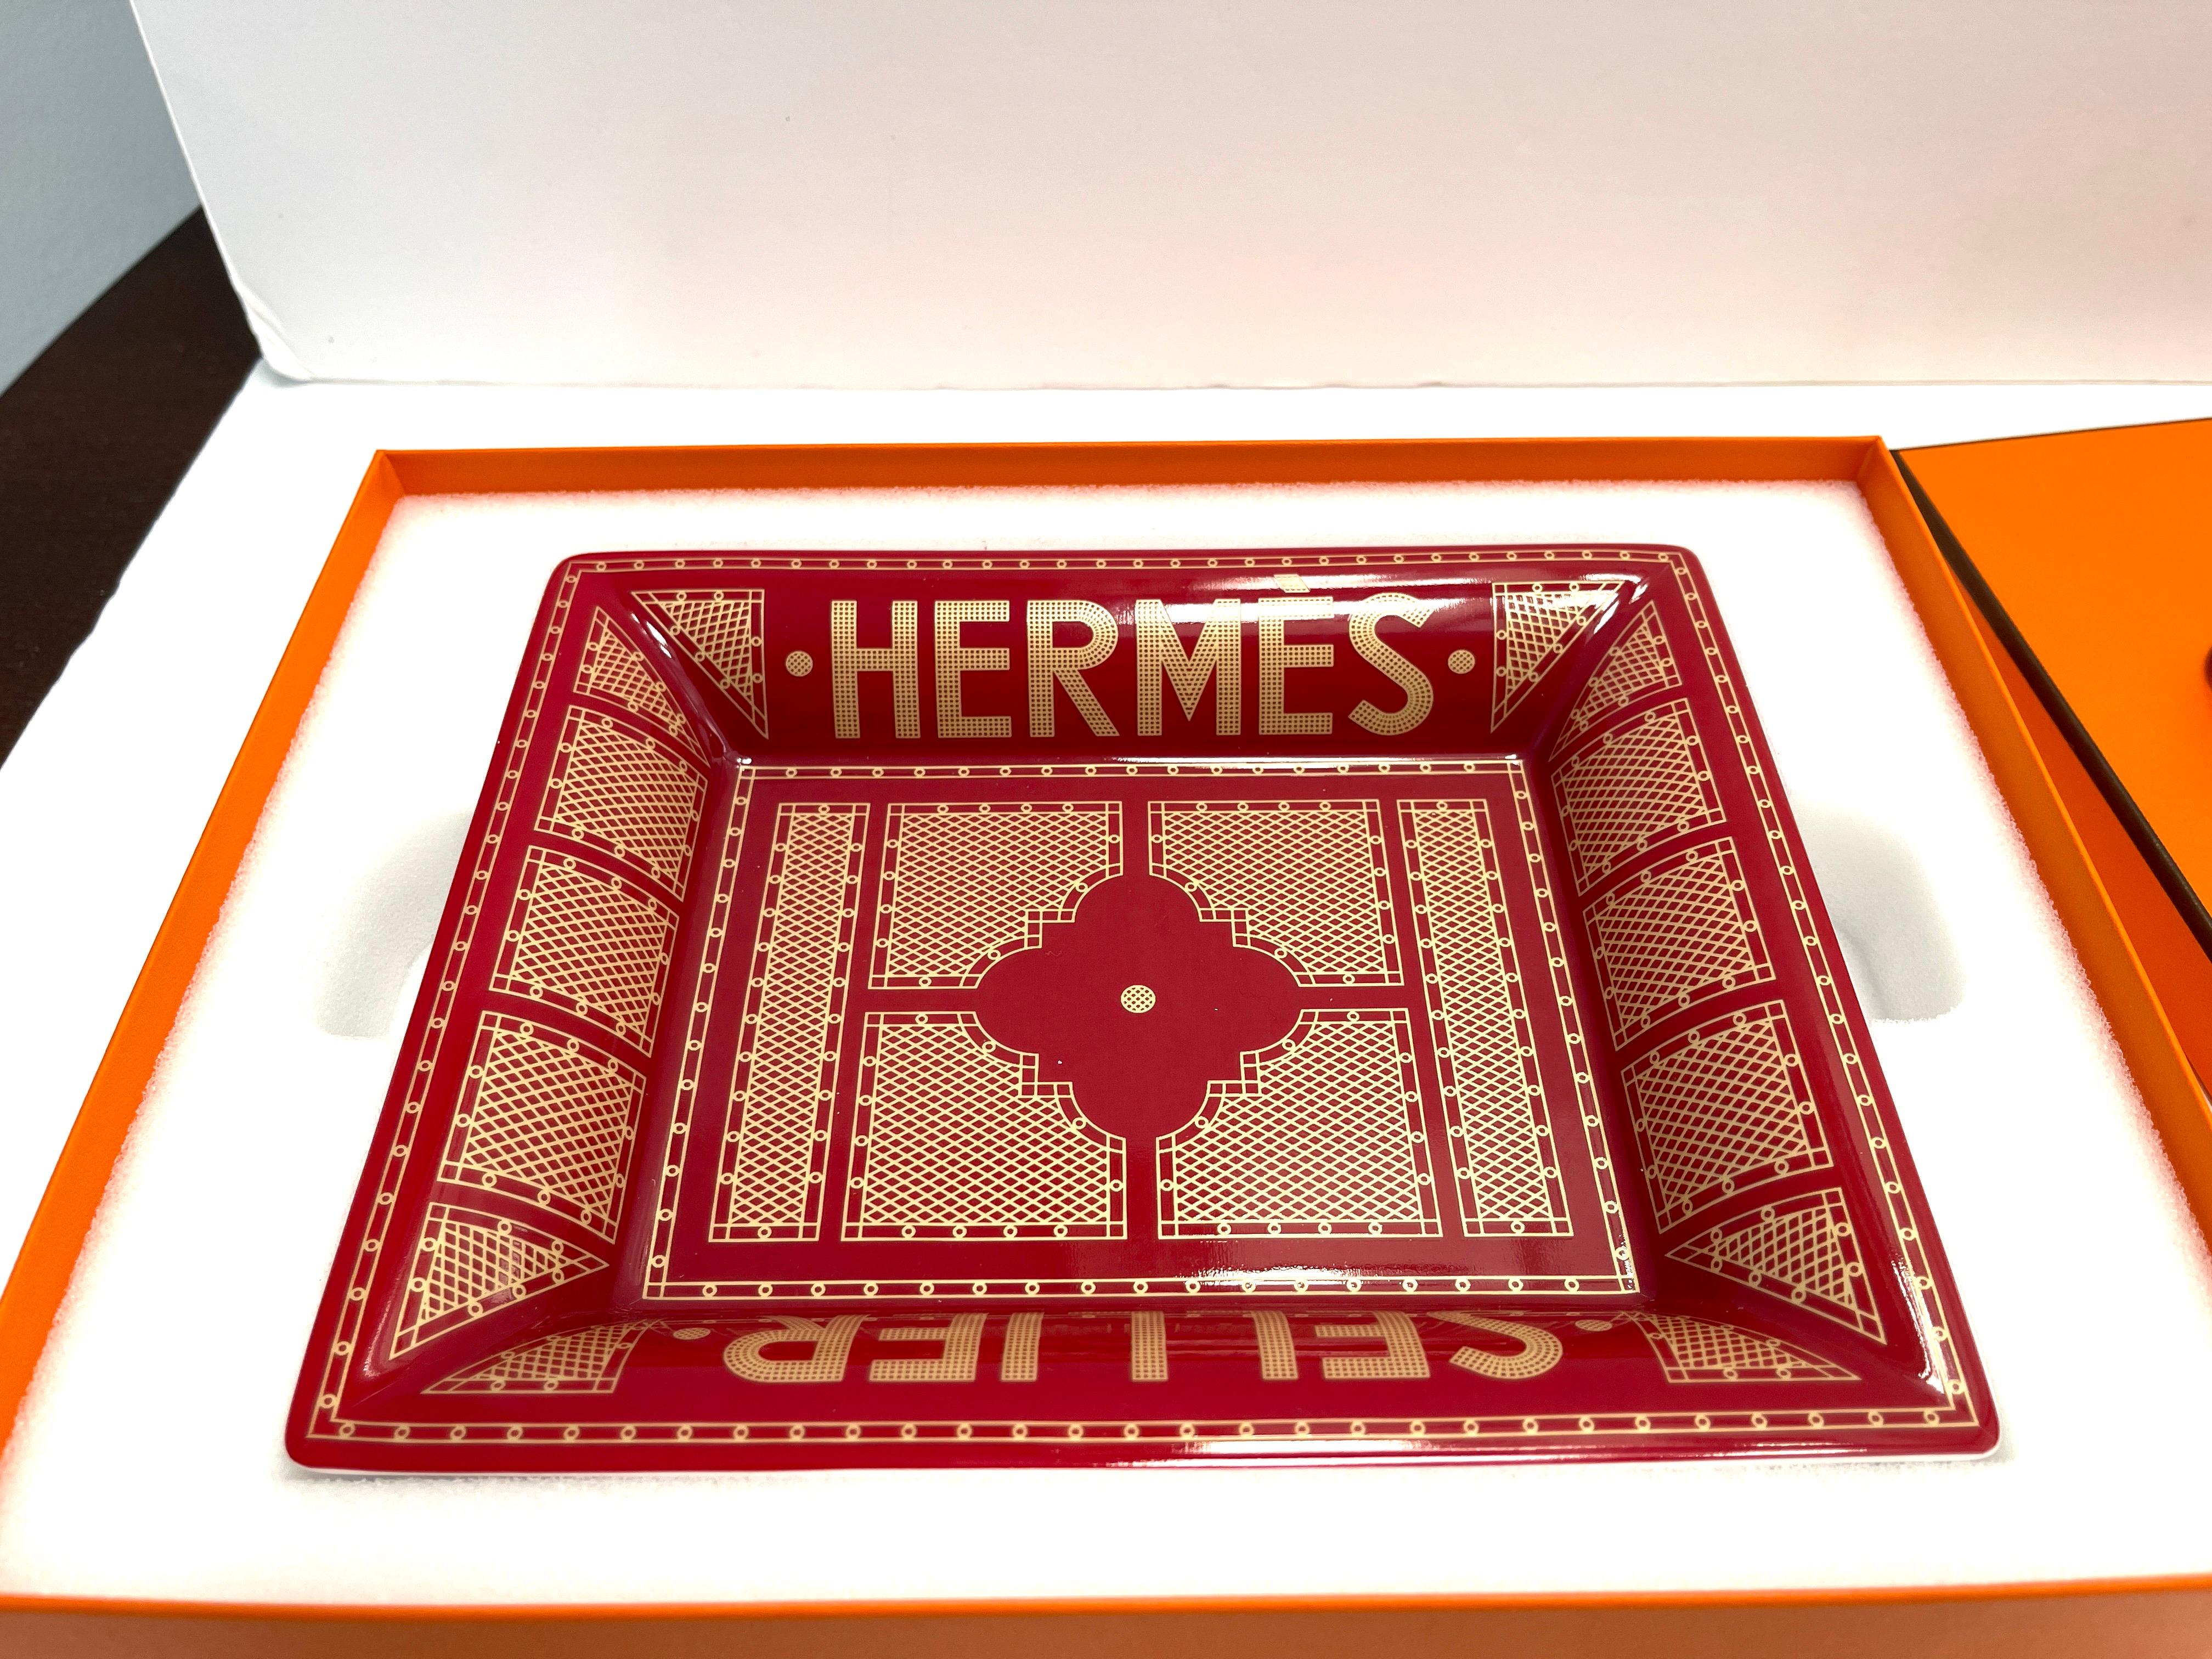 Brand new Hermes Porcelain Tray
Hermes Sellier Change Tray
Rouge Or
Red and GoldChange tray in porcelain with velvet goatskin base
Decorated using chromolithography

Made in France

Measures 6.3